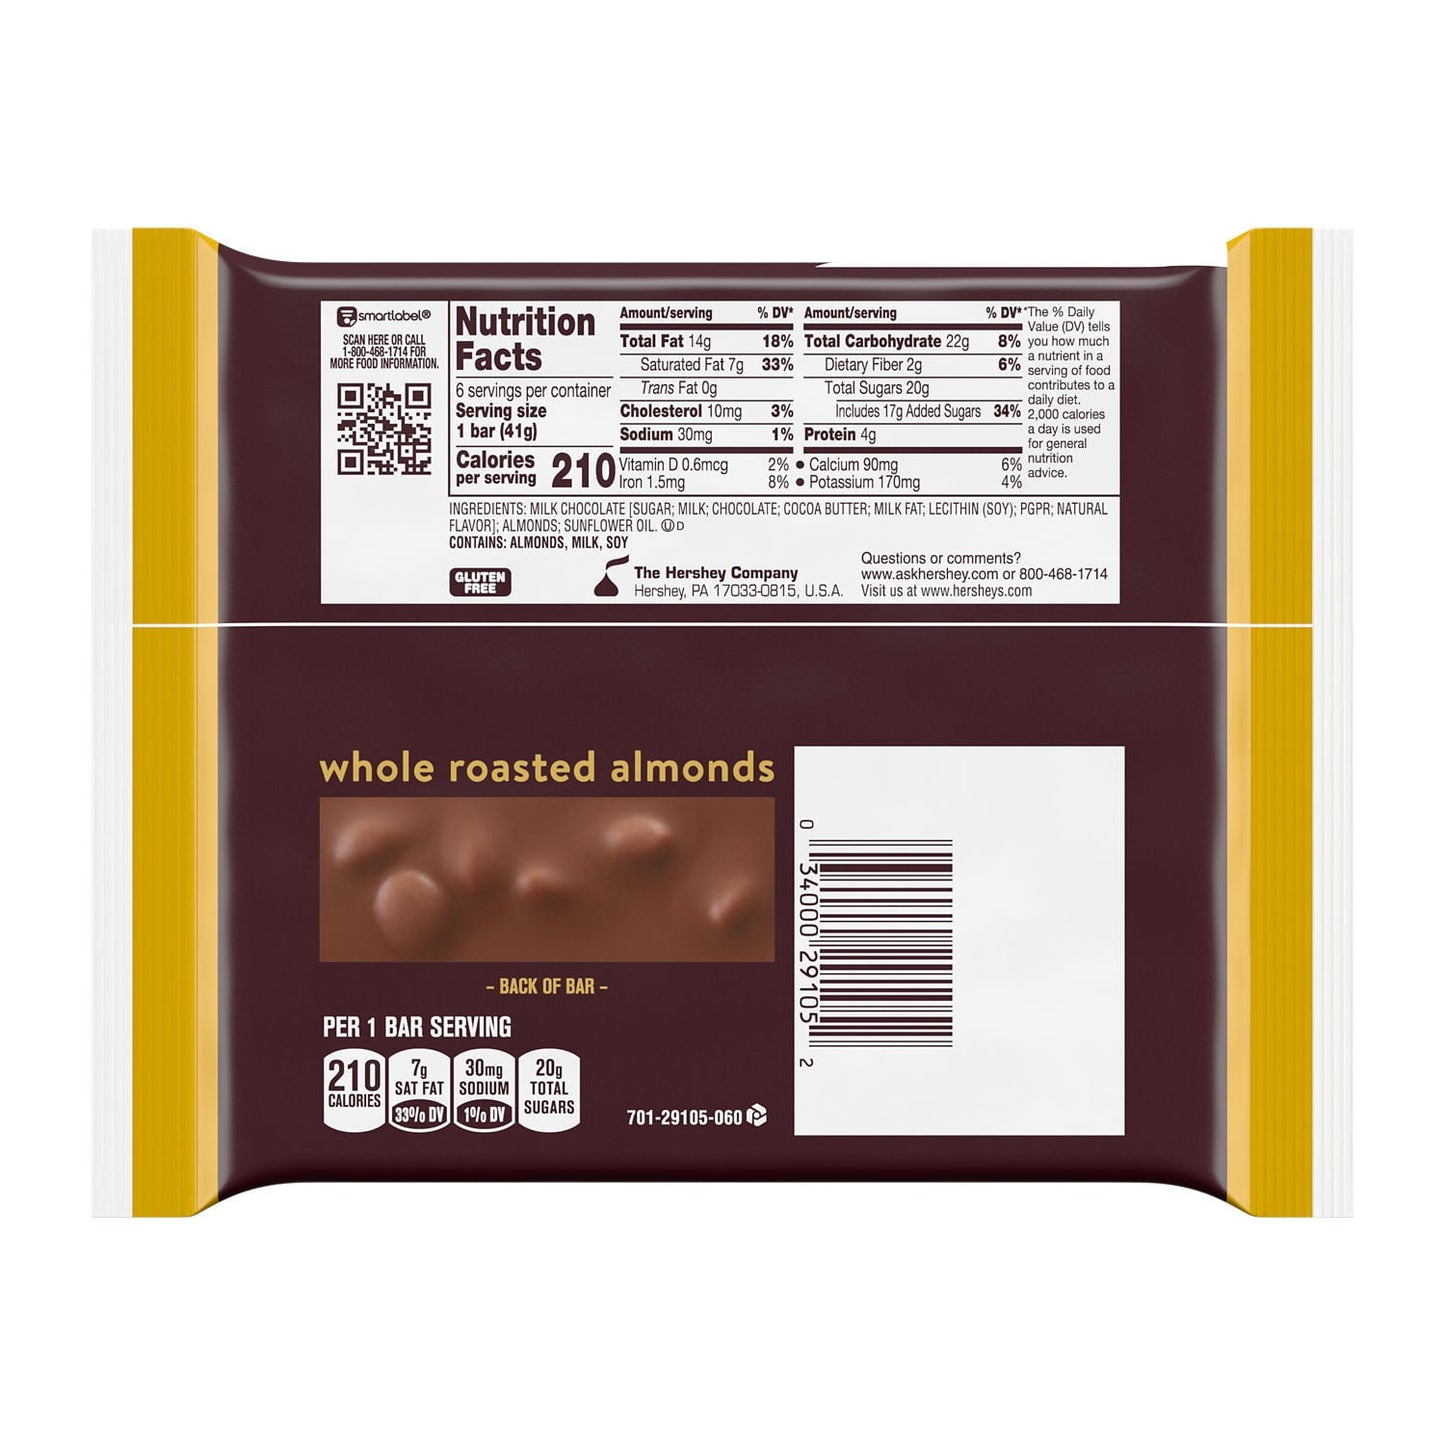 Hershey's Milk Chocolate with Whole Almonds Candy, Bars 1.45 oz, 6 Count